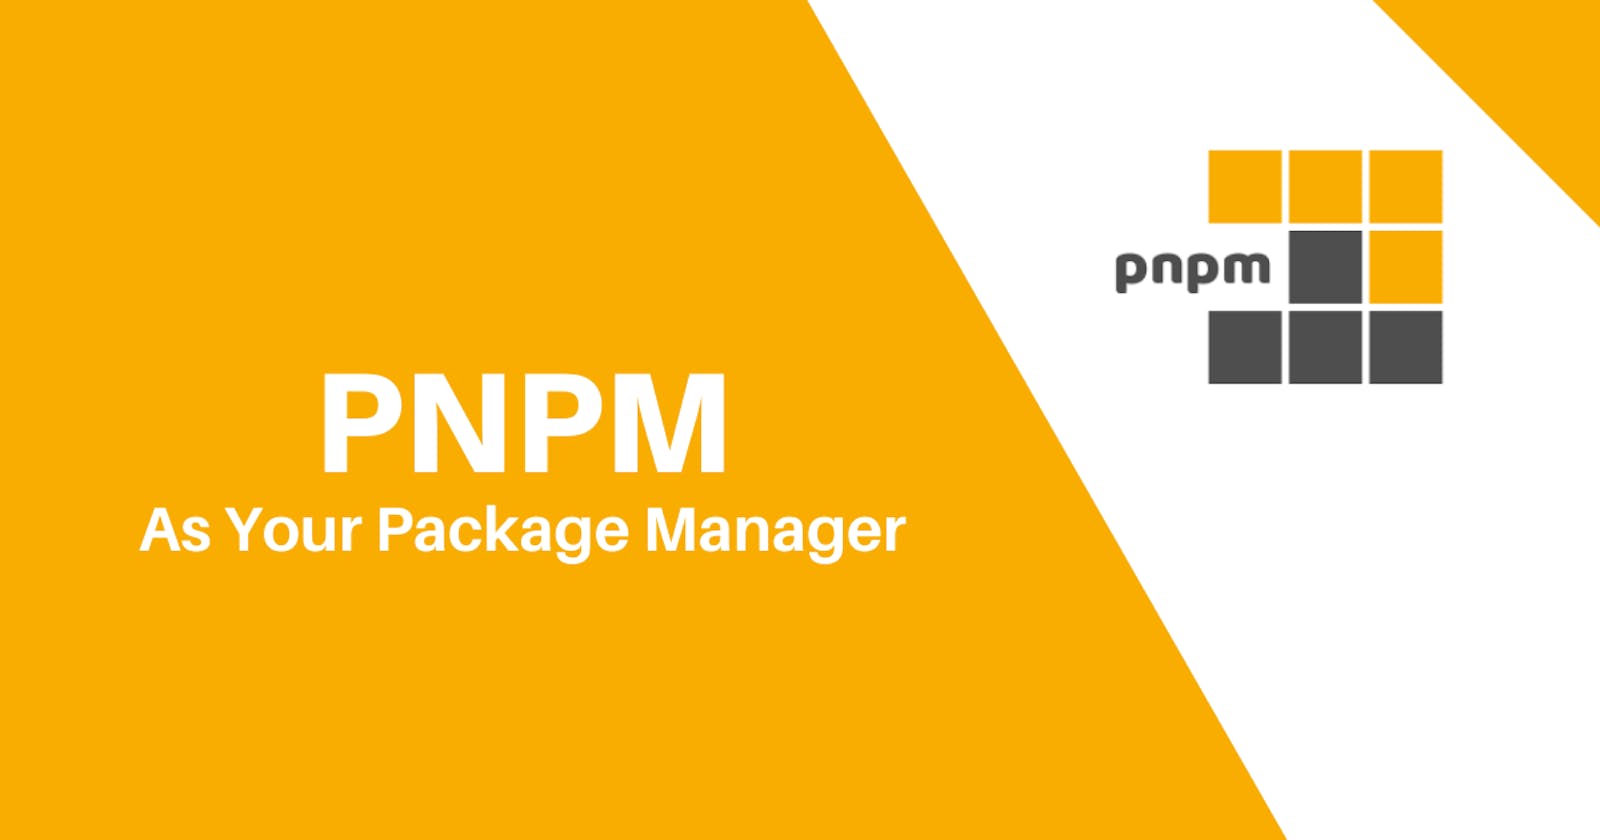 Why You Should Consider PNPM As Your Package Manager